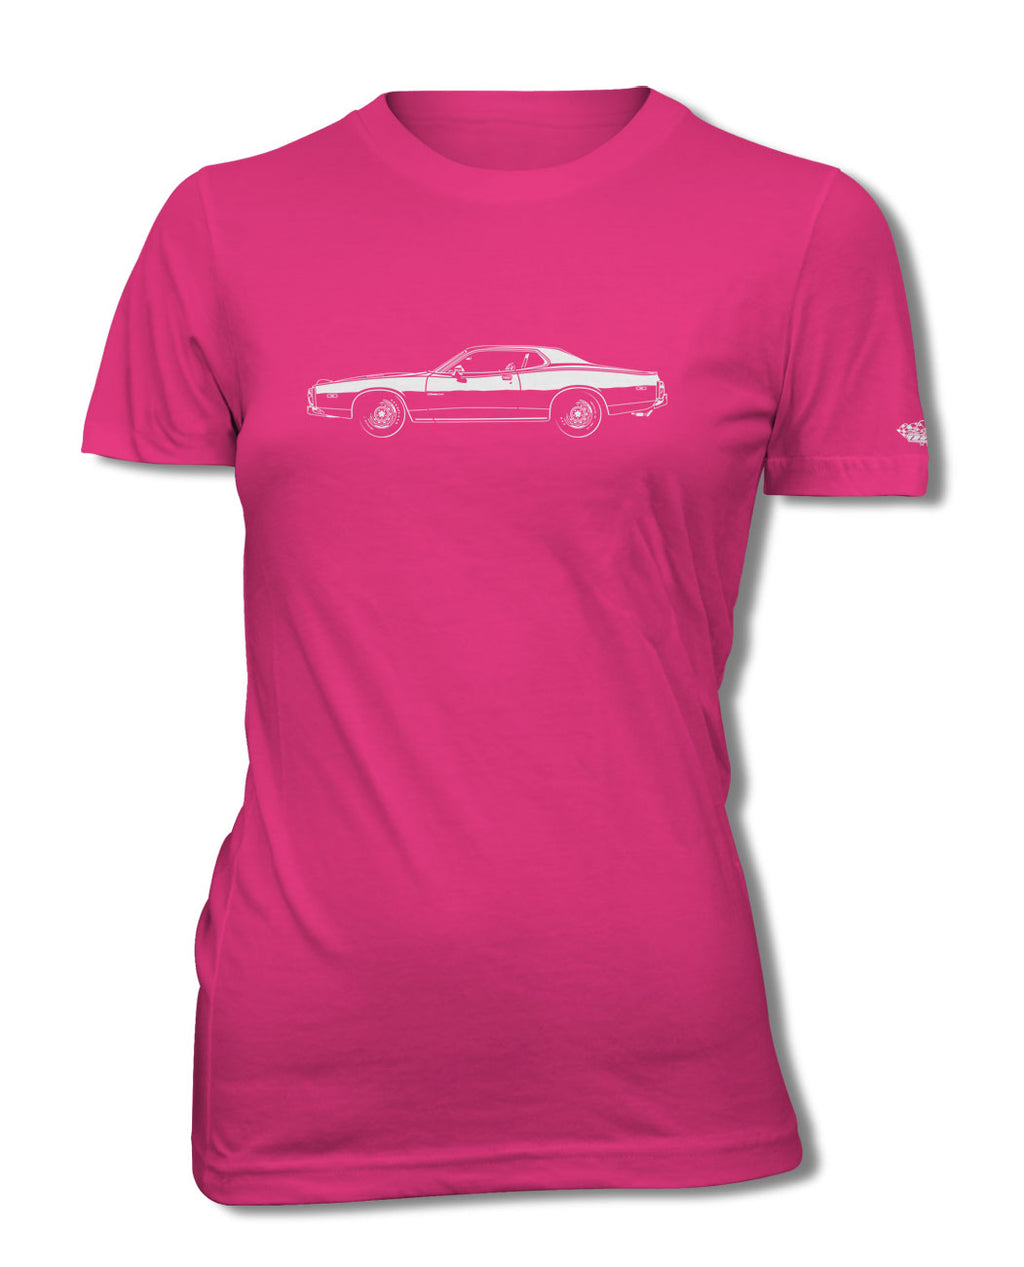 1973 Dodge Charger Rallye 440 Magnum Coupe T-Shirt - Women - Side View